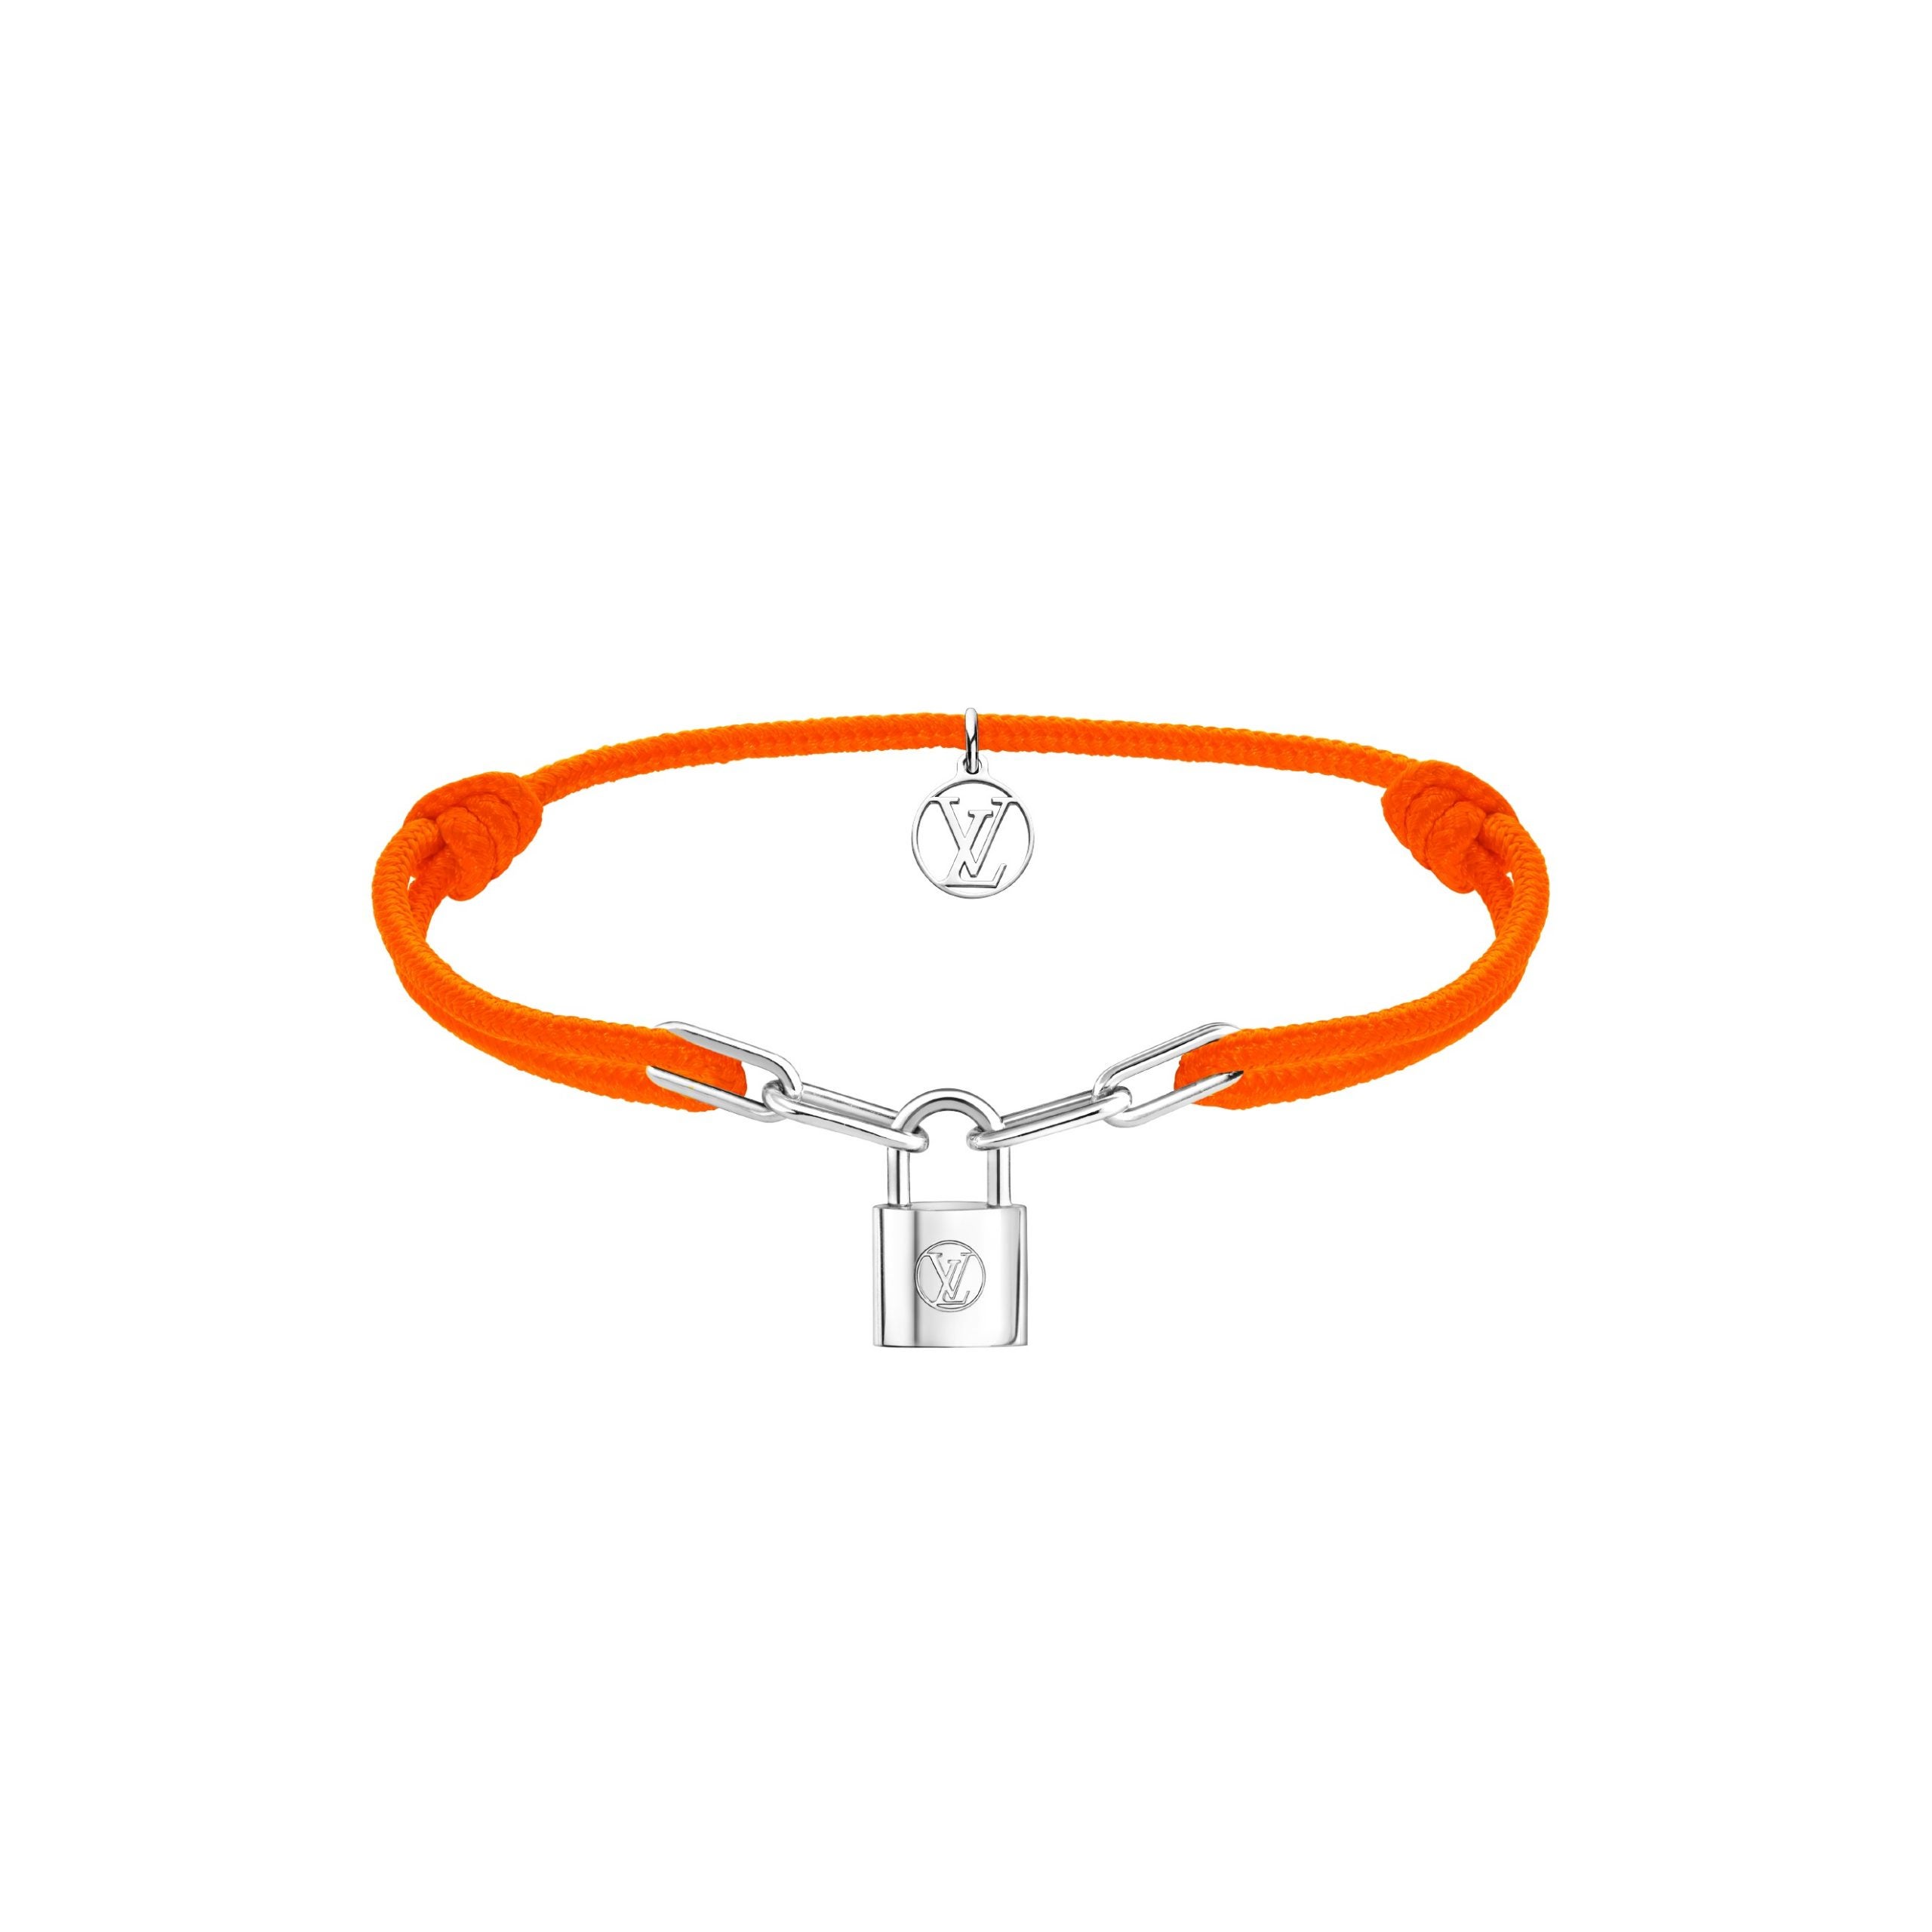 The Virgil Abloh UNICEF bracelet. One of the first LV pieces I bought back  when the site had the black alongside the other colors available. I really  wanted to own more Virgil